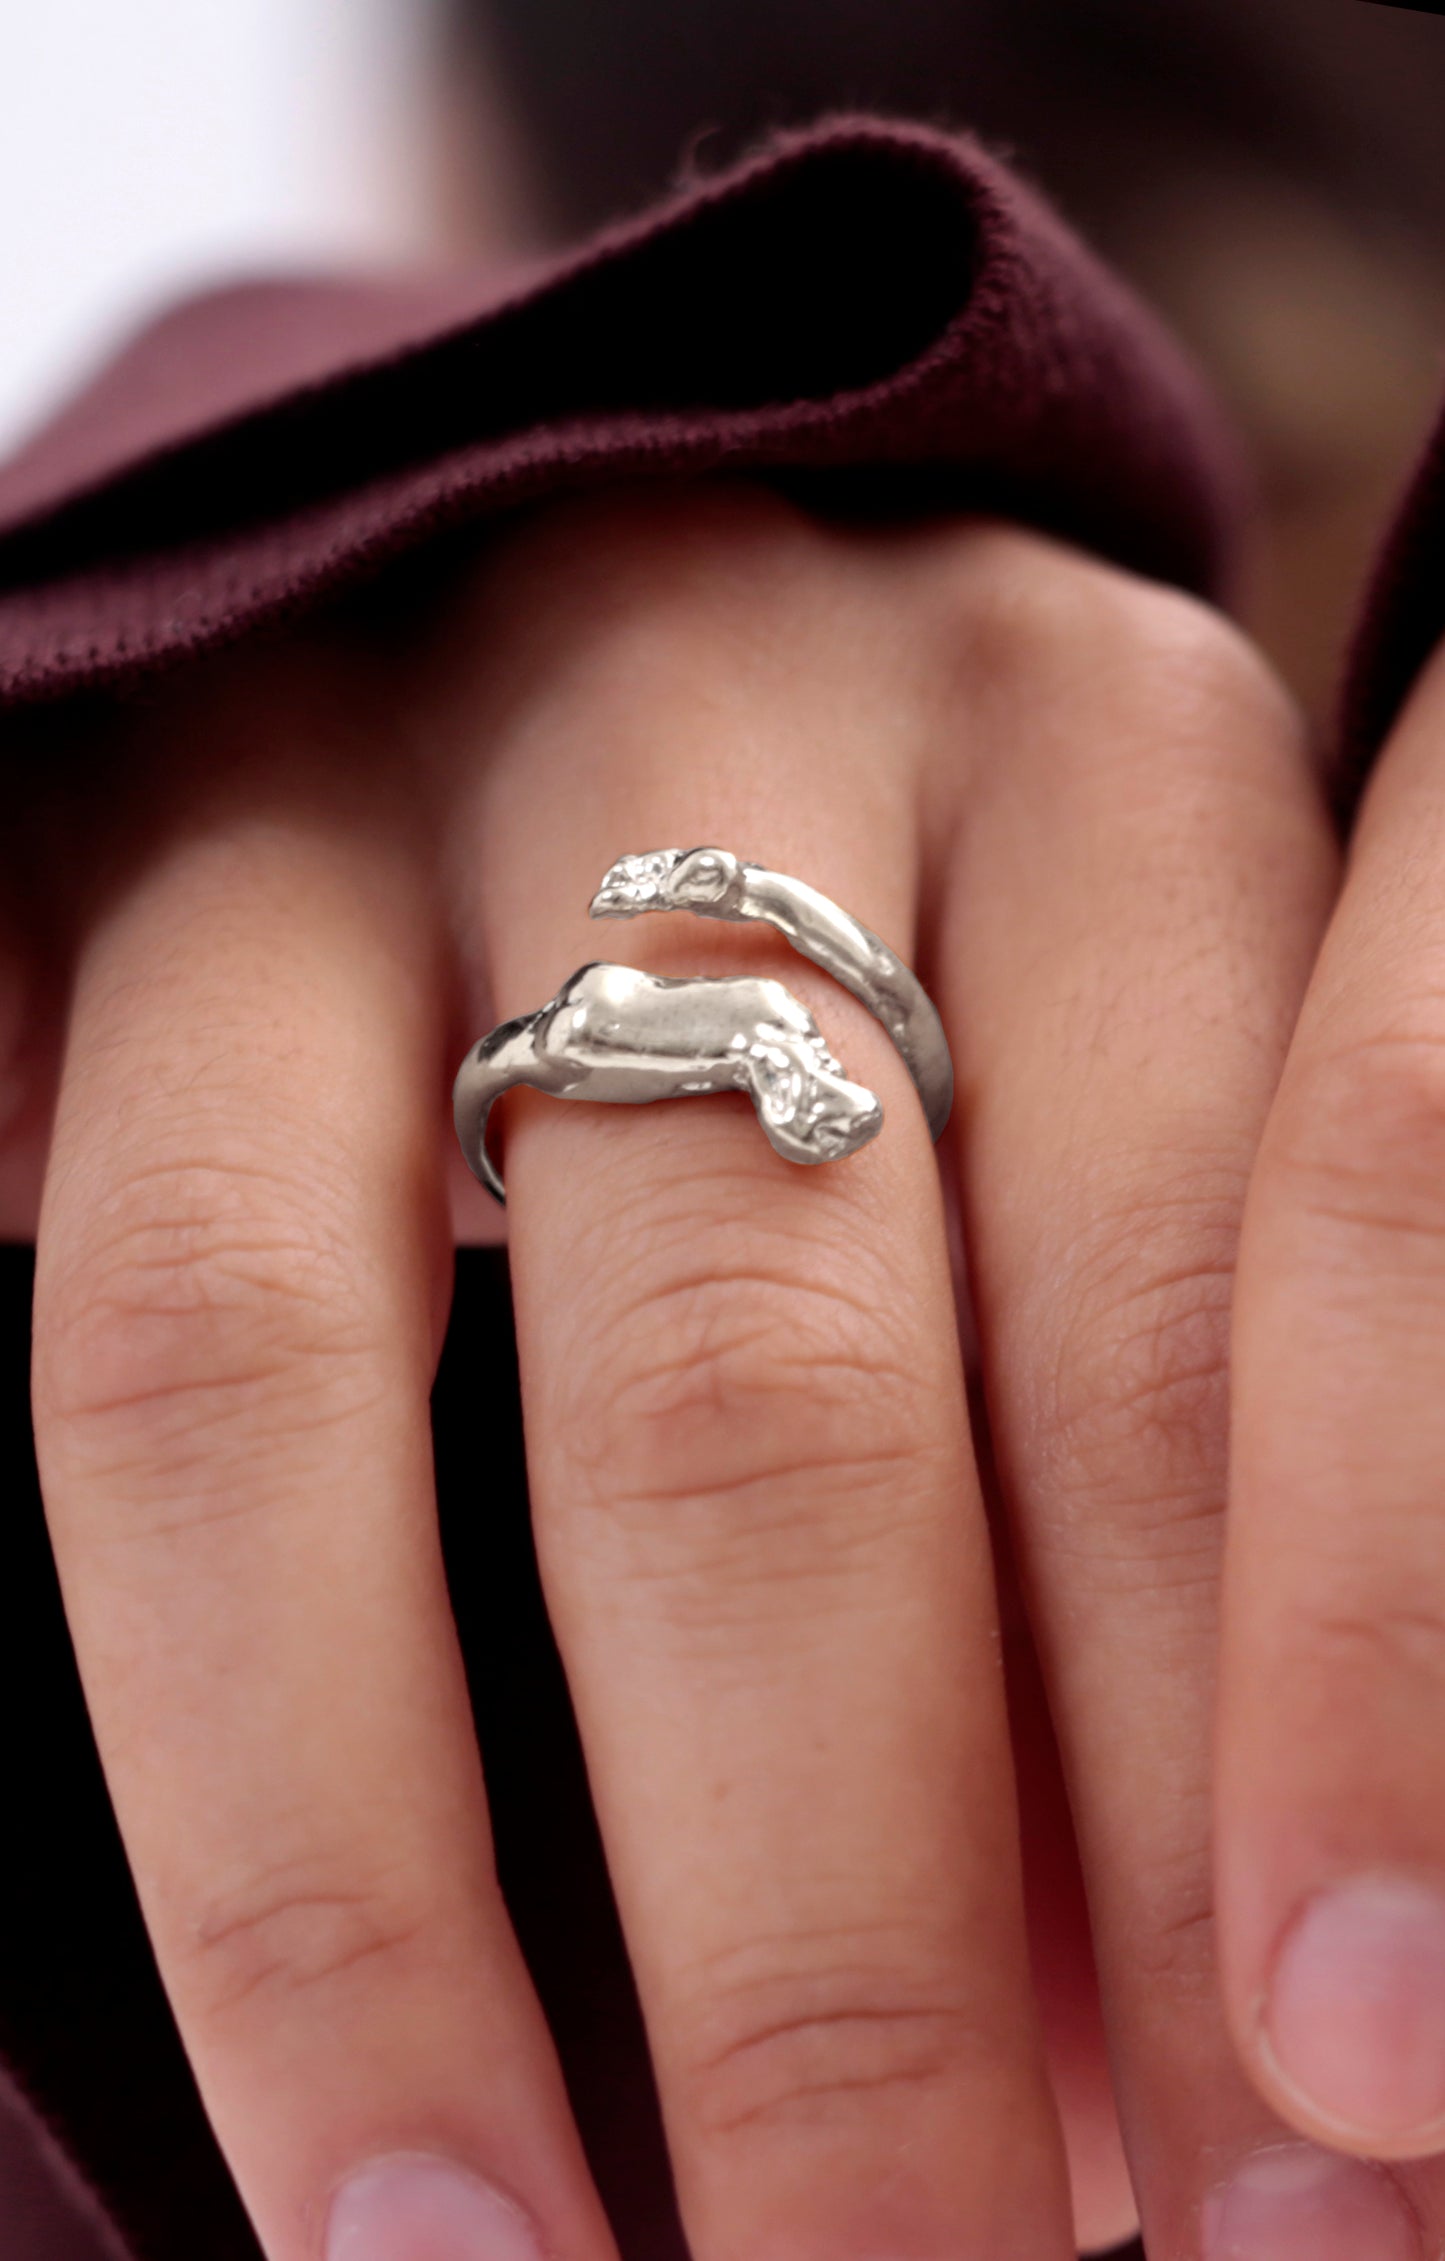 Detailed view of Sterling Silver Cupid Ring by CLARK. The hand craft and romantic details of the wing and foot are clearly in view. This is a unique statement adjustable ring.